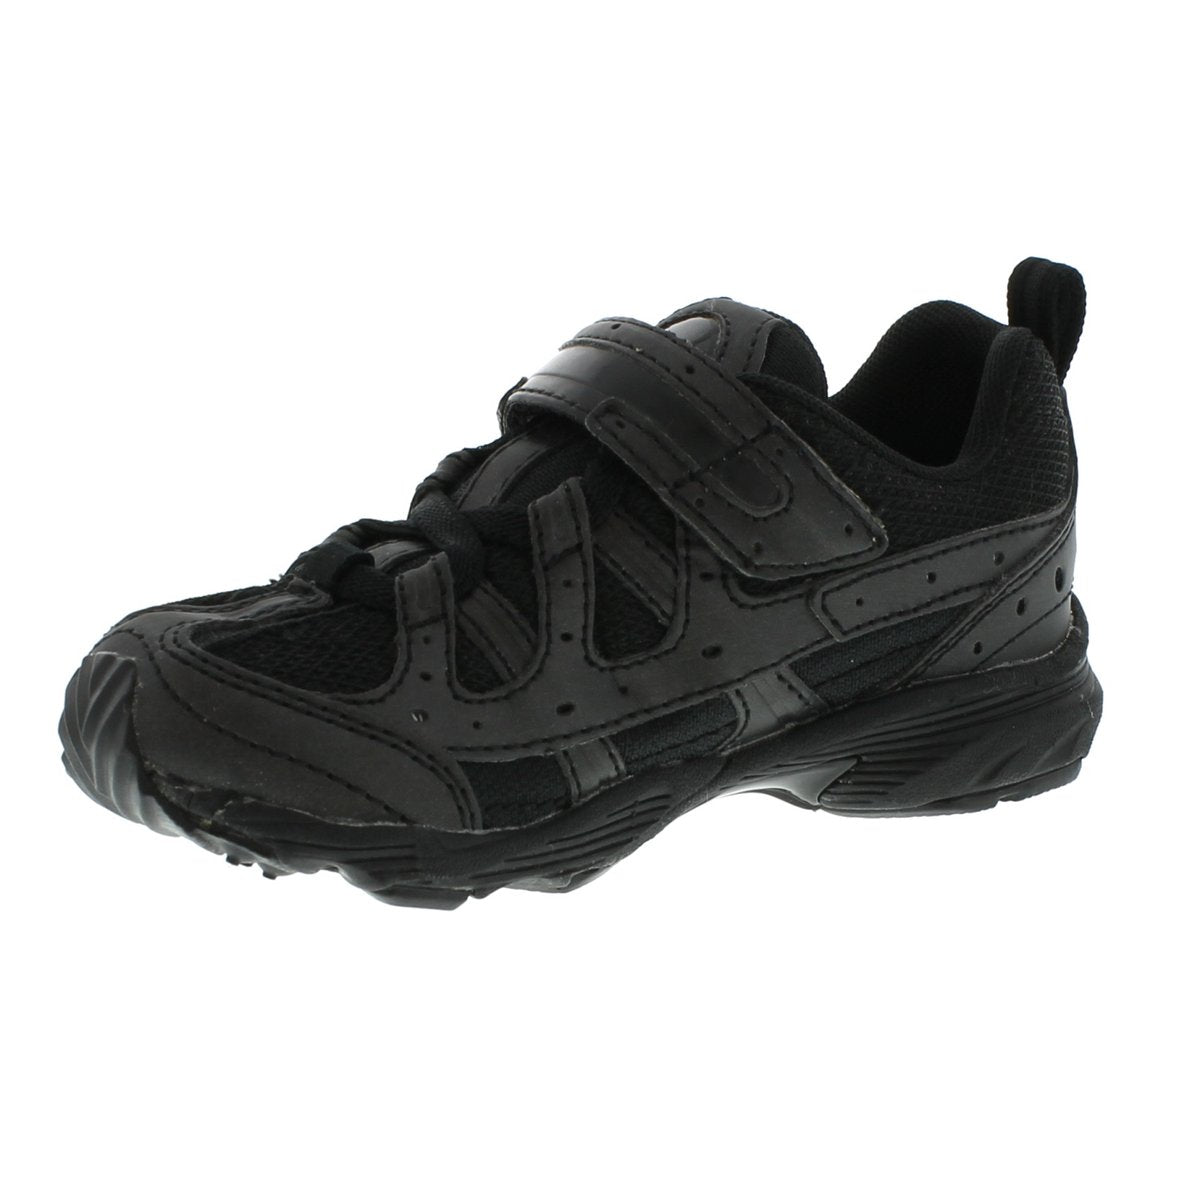 Child Tsukihoshi Speed Sneaker in Black Noir from the front view